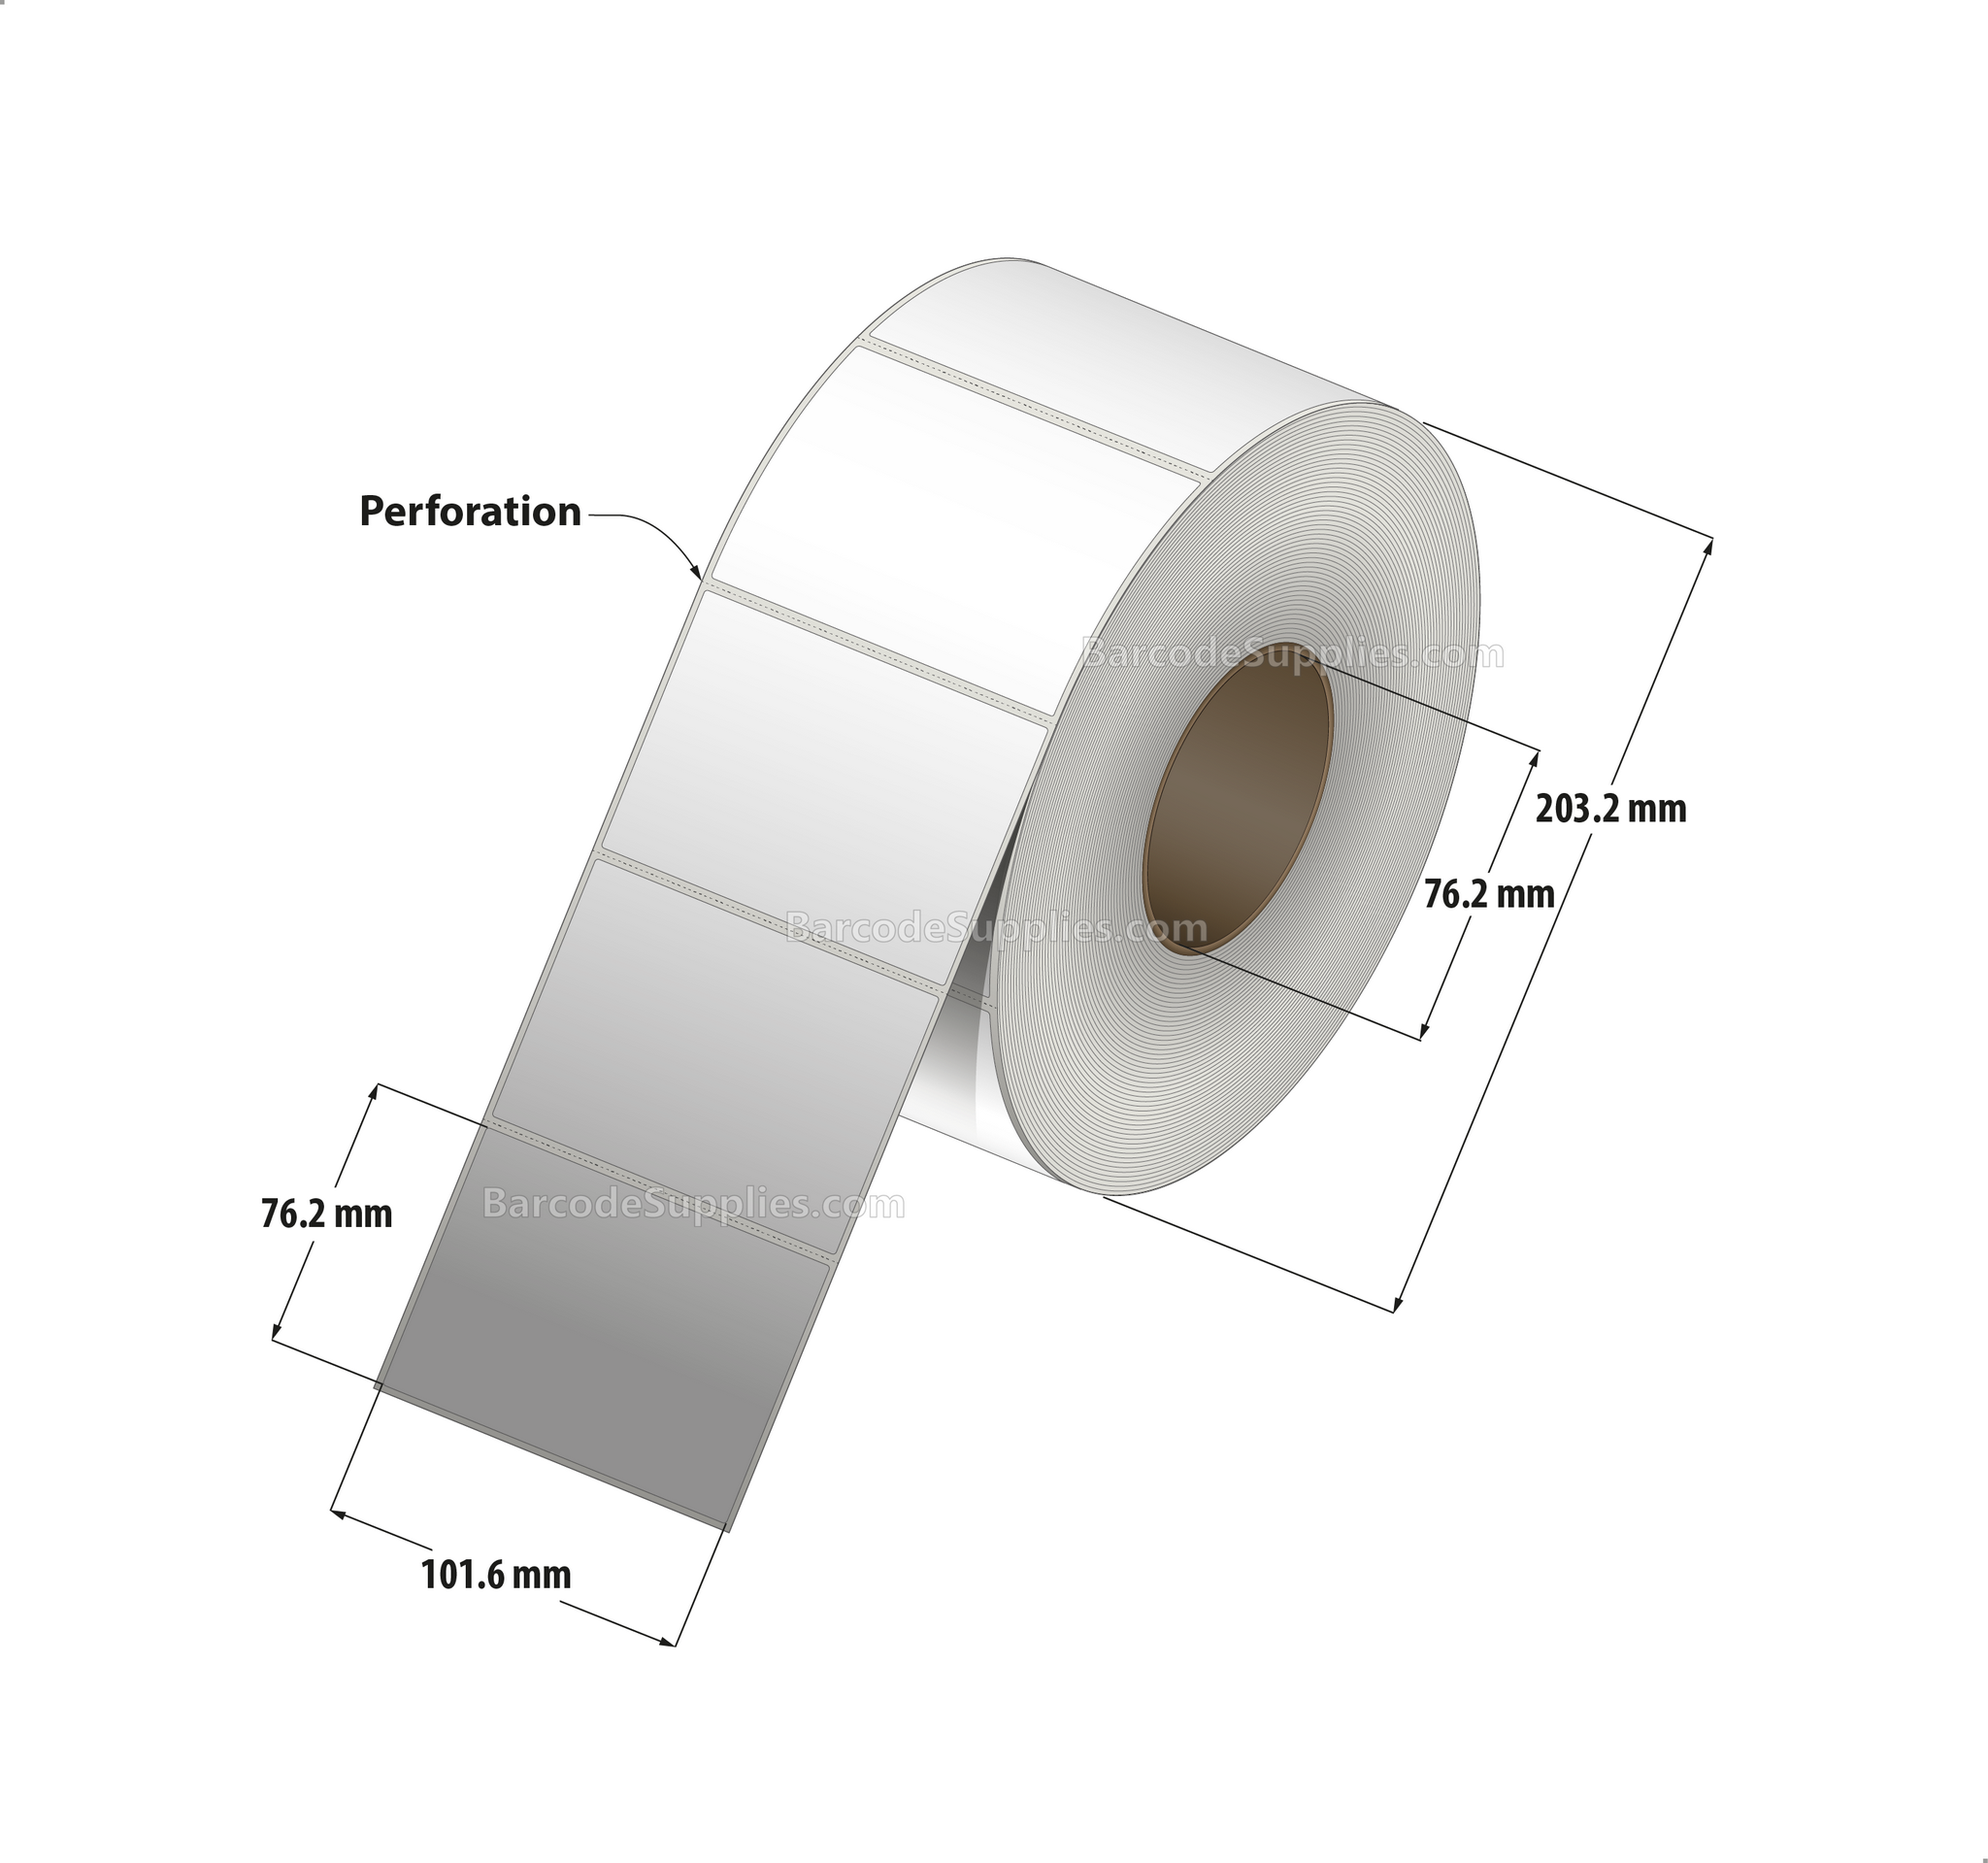 4 x 3 Direct Thermal White Labels With Acrylic Adhesive - Perforated - 1900 Labels Per Roll - Carton Of 4 Rolls - 7600 Labels Total - MPN: RDE-4-3-1900-3